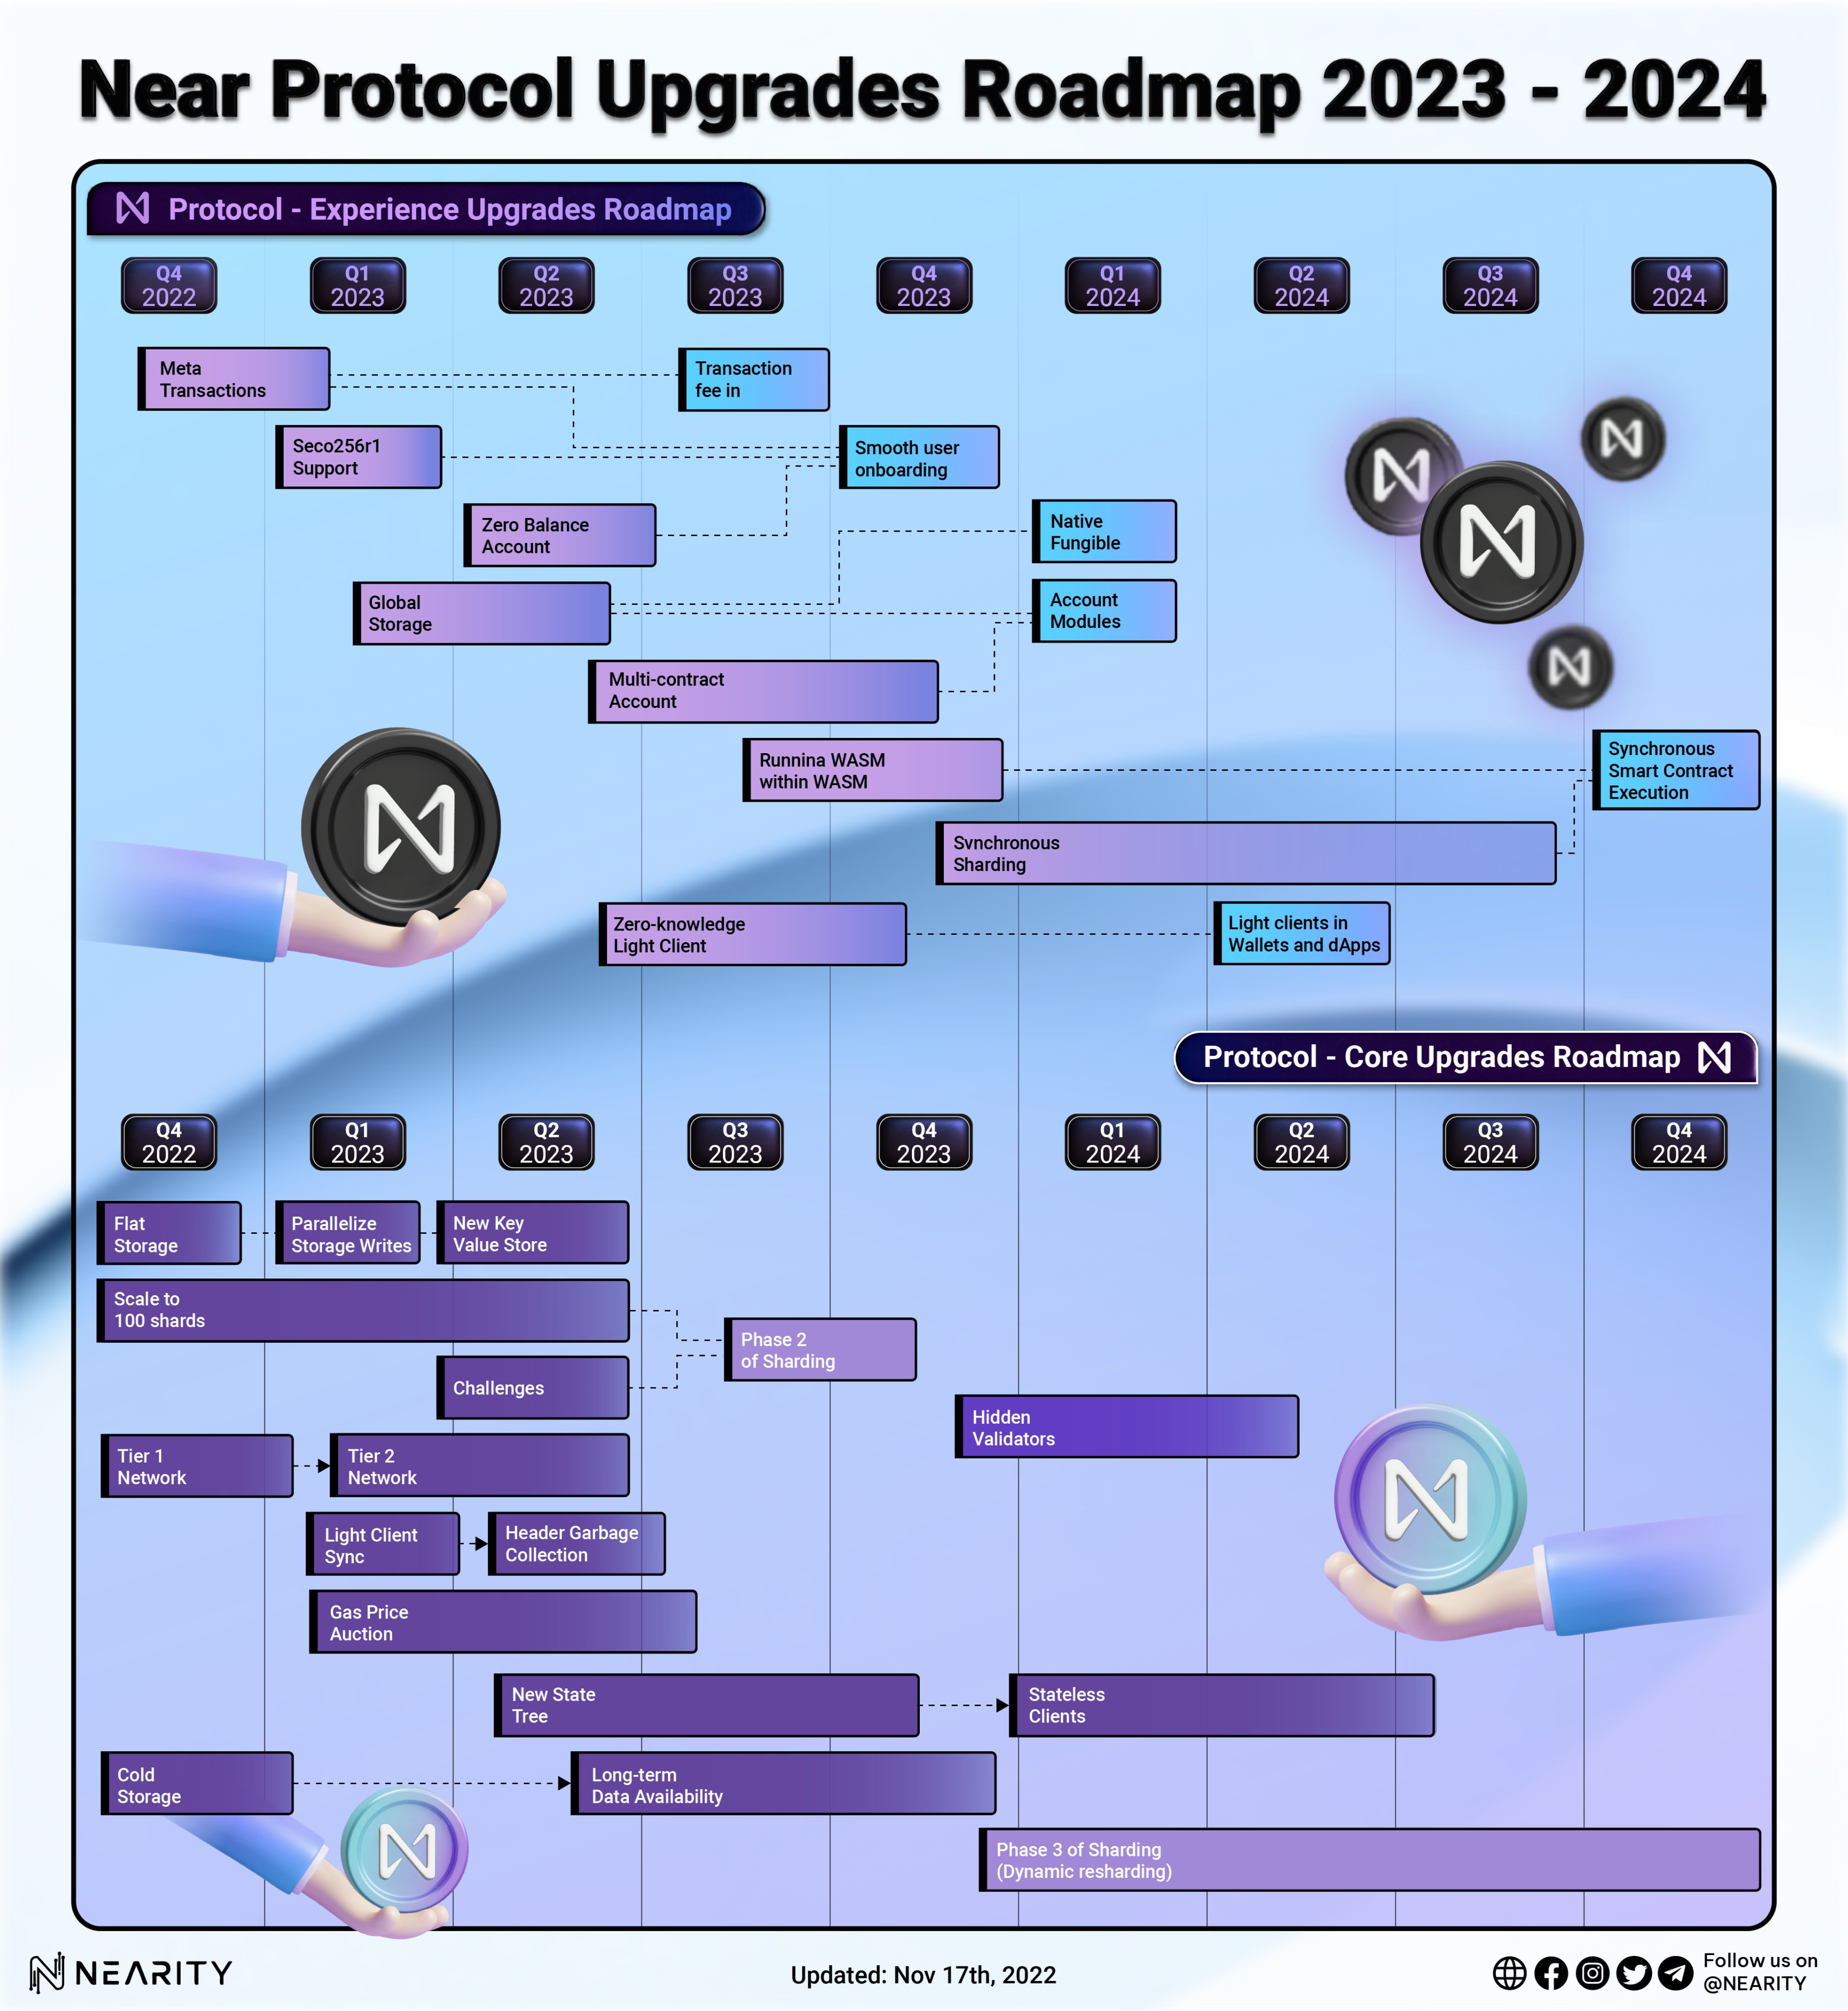 2/#NEAR Protocol Roadmap 2023-2024 Check out what Pagoda is calling a “living document” https://near.org/blog/near-protocol-roadmap-2023-4-the-next-2-years-of-near%EF%BF%BC/